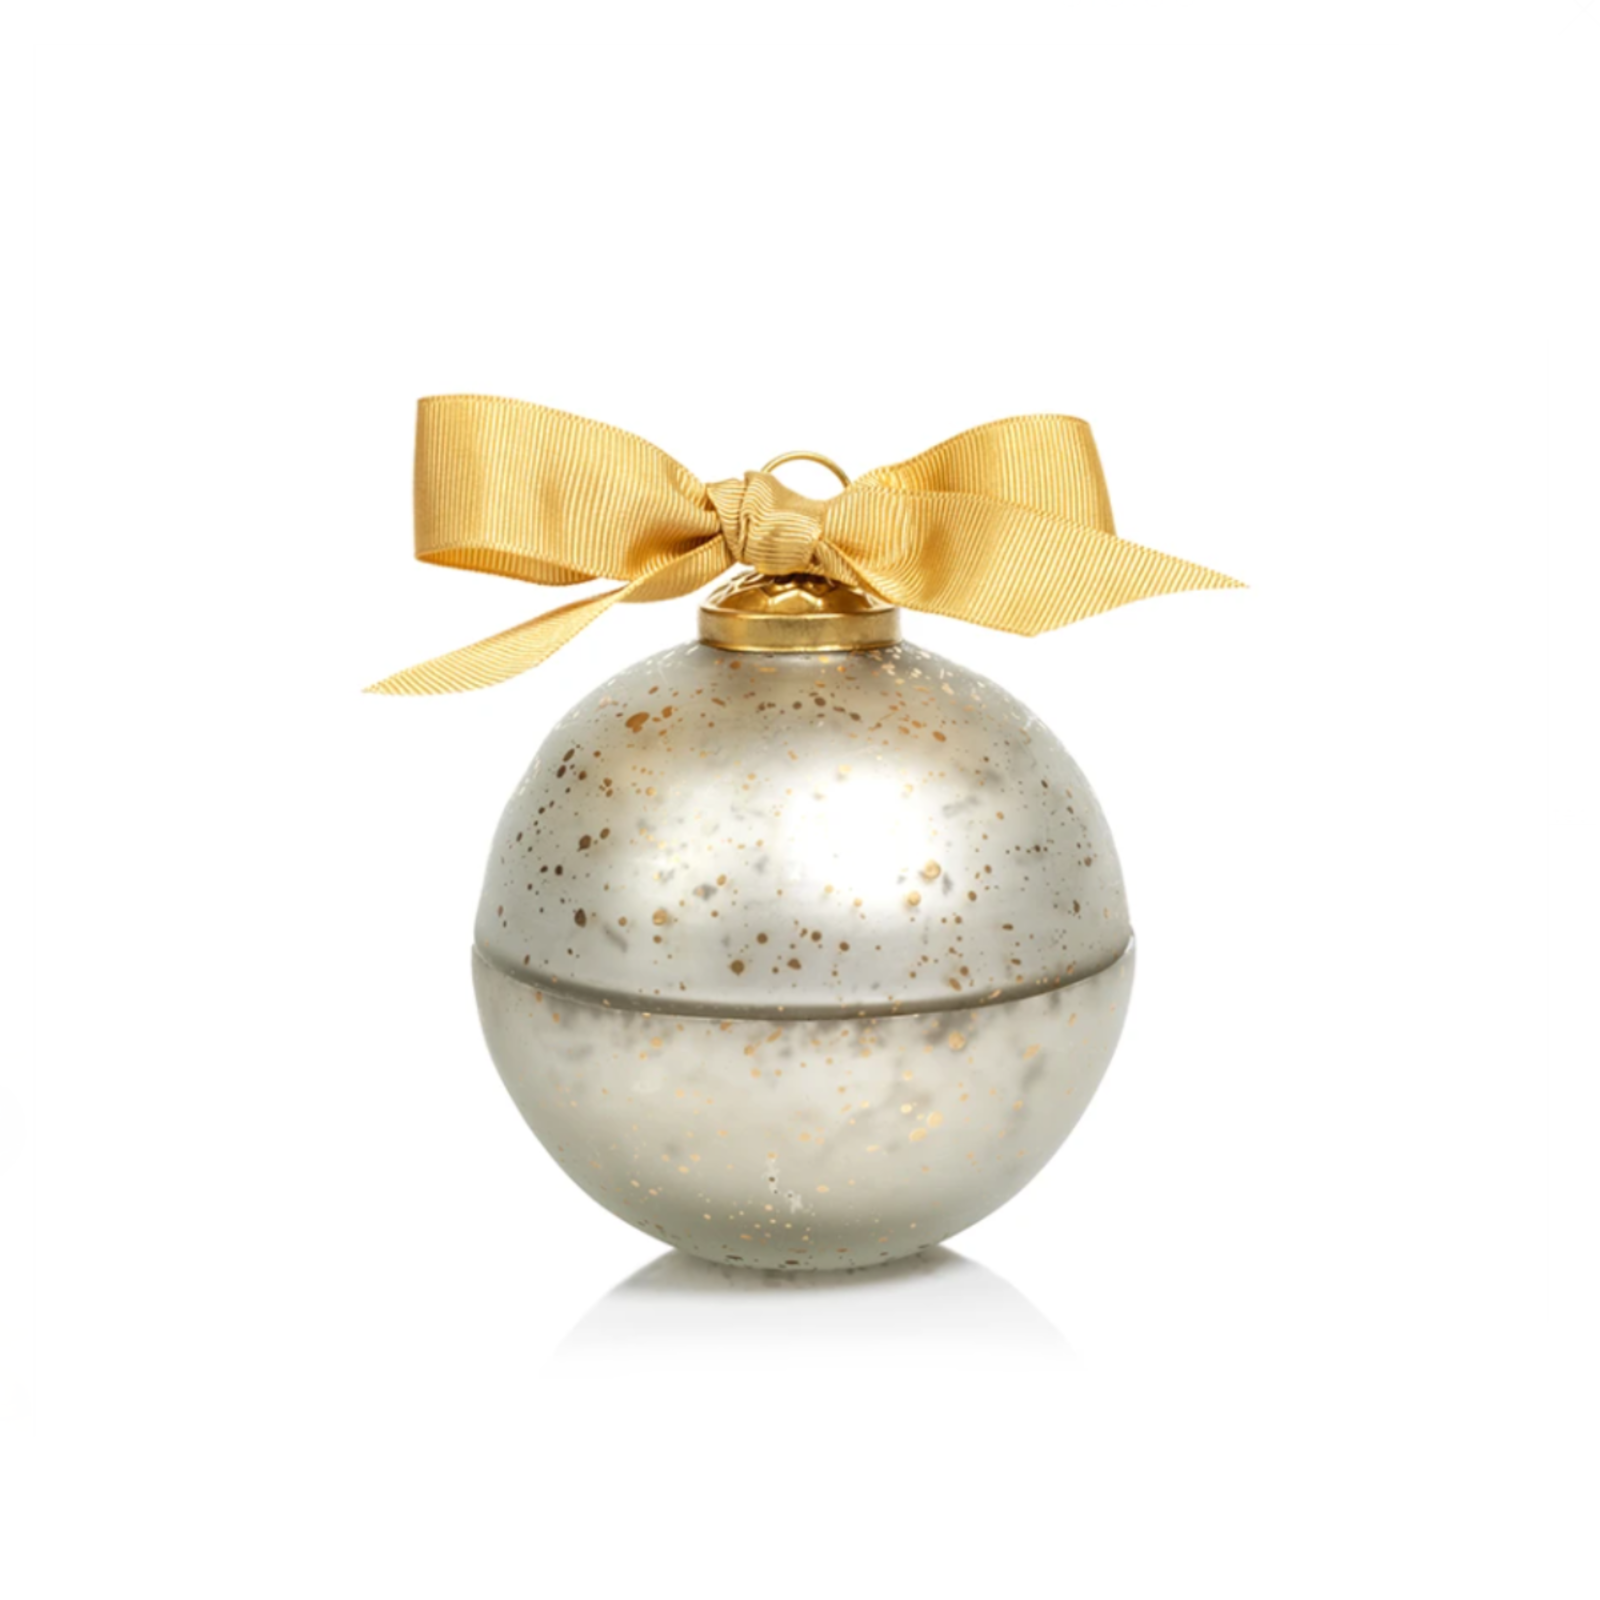 Zodax Scented Candle Ornament Silver IG-2601 loading=